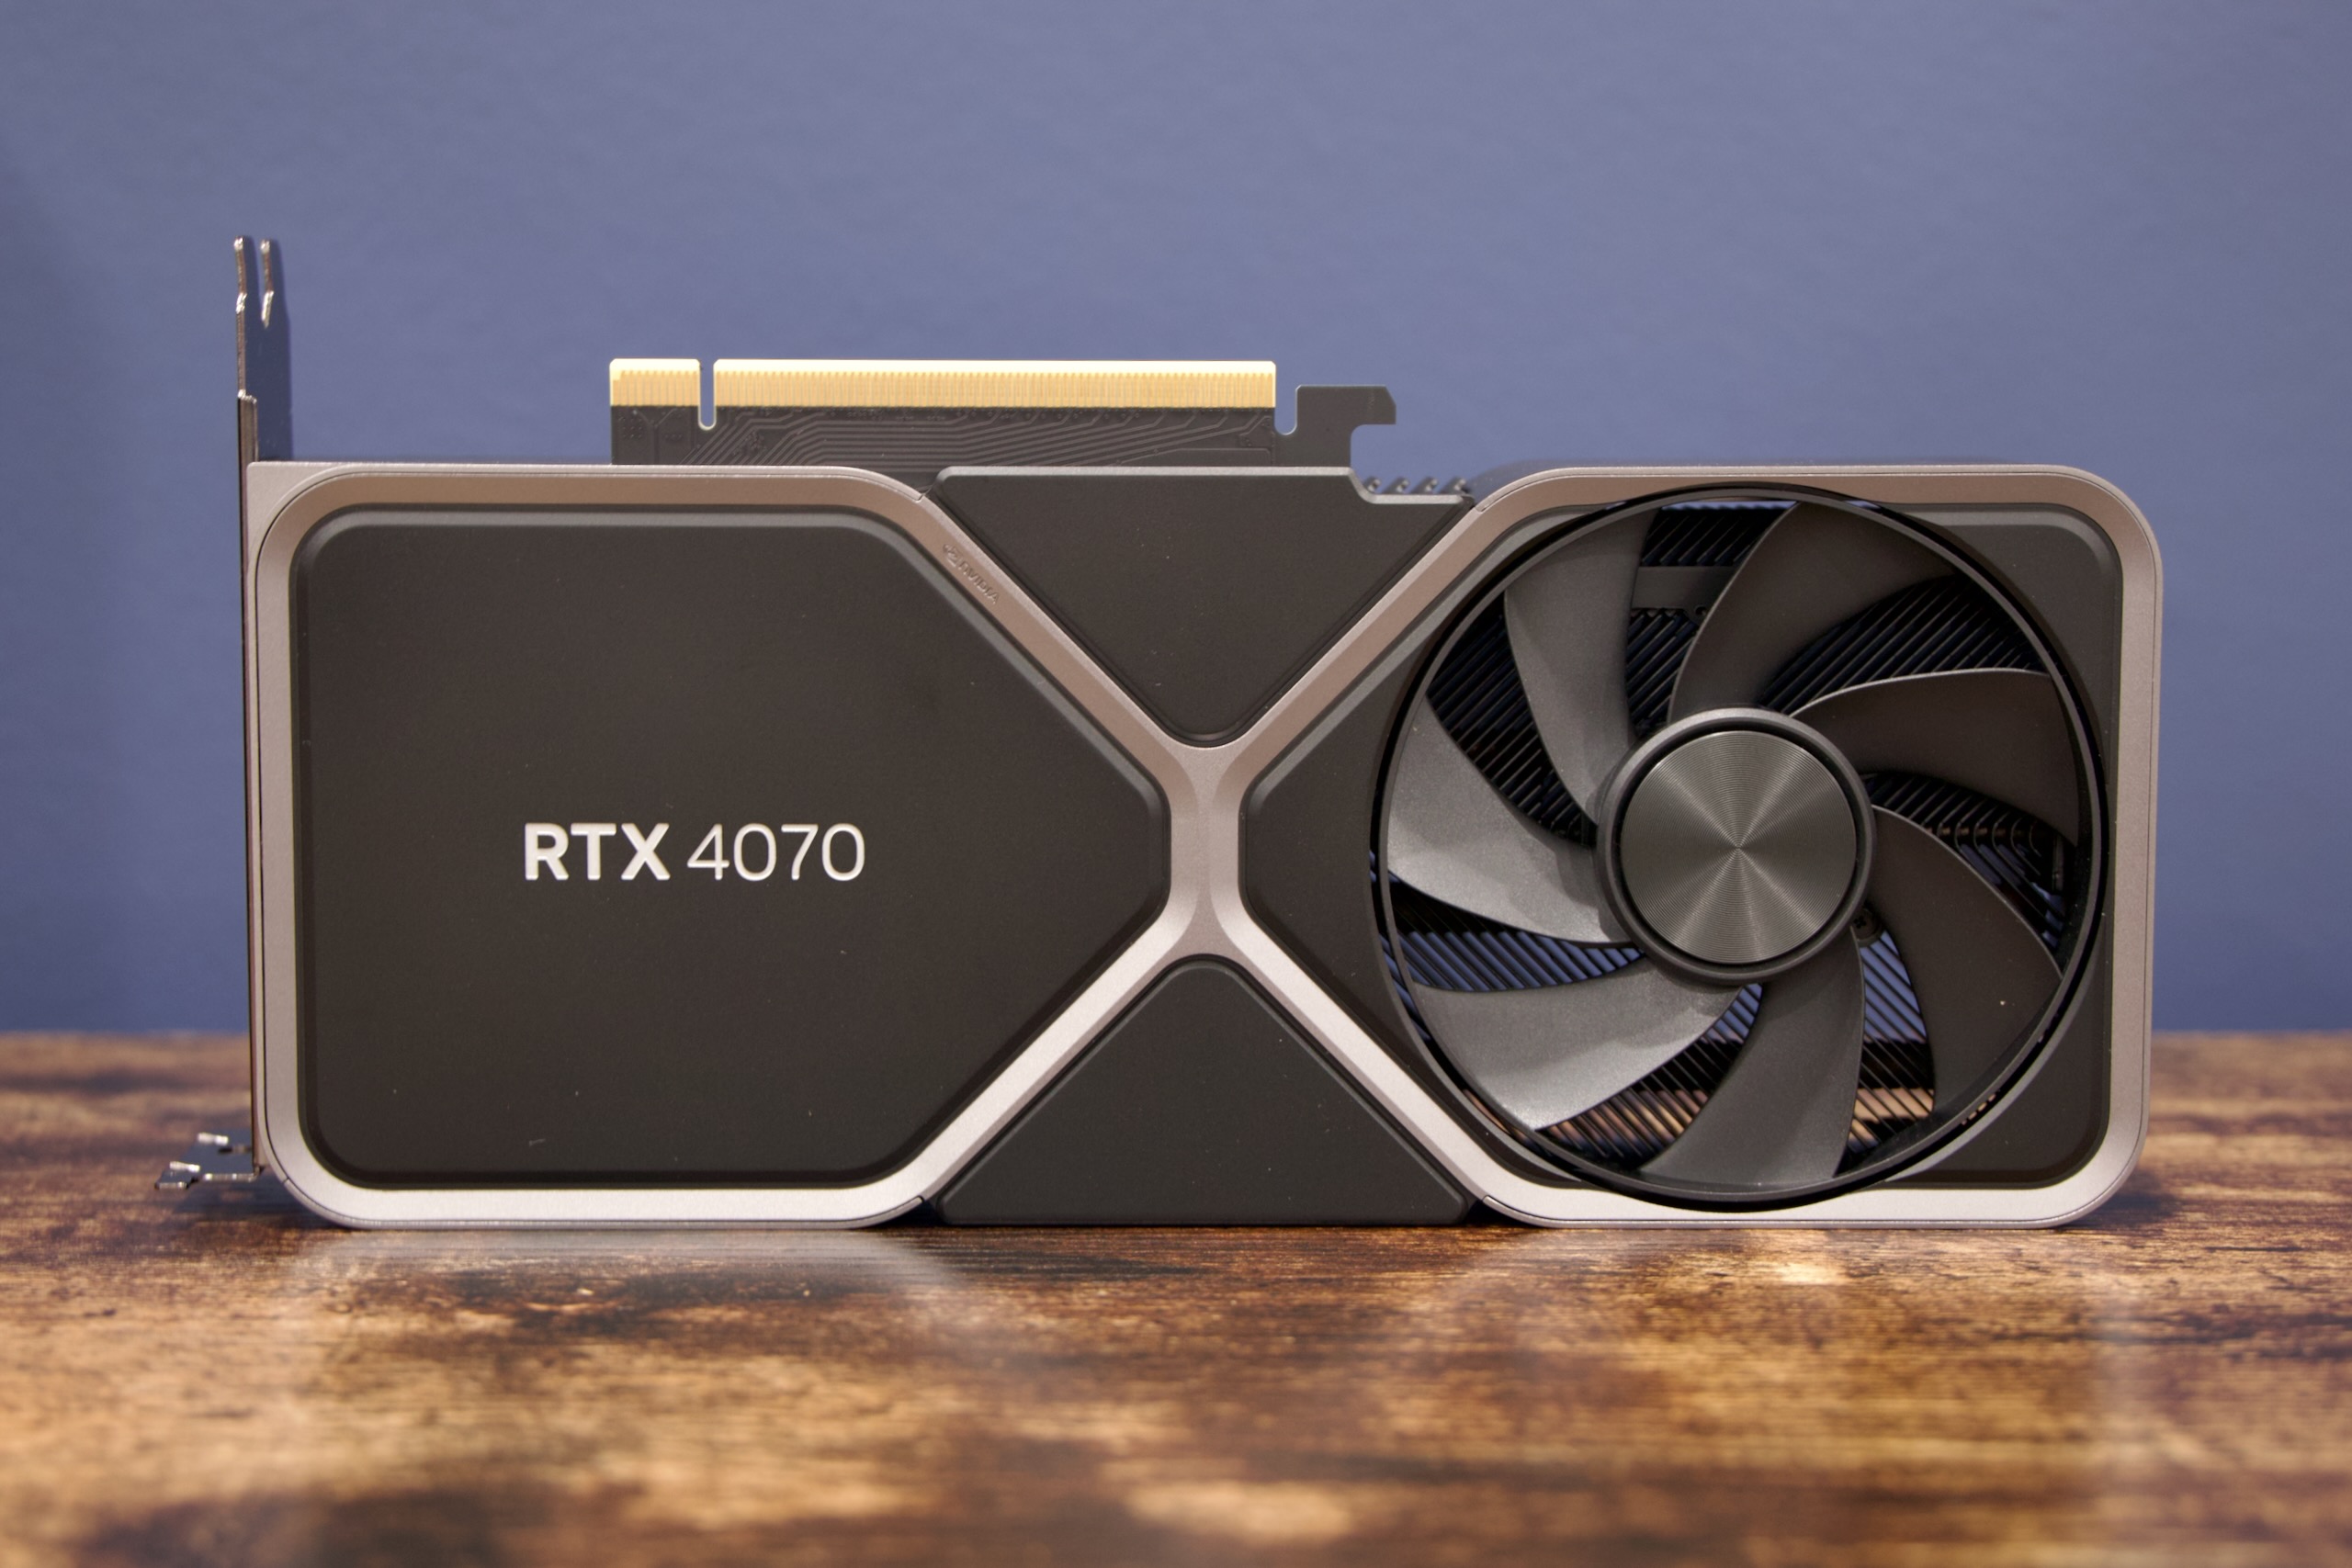 NVIDIA GeForce RTX 4070 Super Founders Edition review: Finally, a great  value 40-Series graphics card